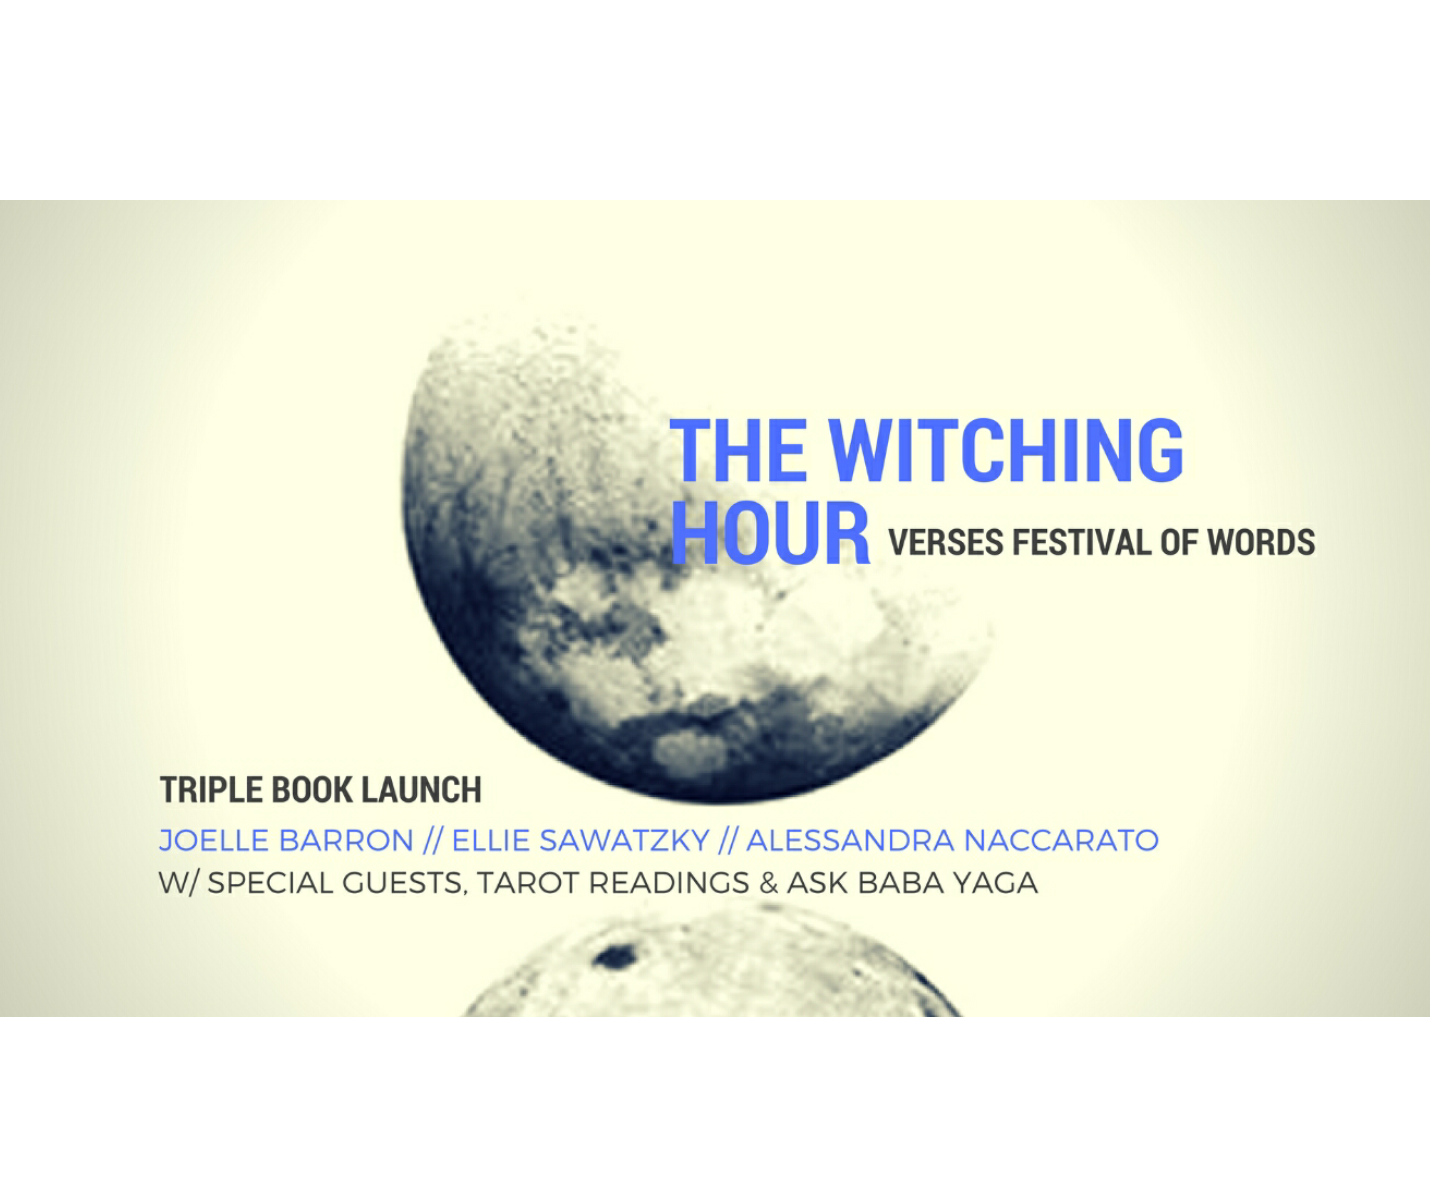 [ID: Image of a partial moon face. The bottom of the moon is reflected at the bottom of the image. The moon is set against an off white background. The words "The Witching Hour" "Verses Festival of Words" " Joelle Barron // Ellie Sawatzky // Alessandra Naccarato" and " w/ special guests, tarot readings and ask baba yaga" overlaid on the moon image in black and blue font. /end ID]